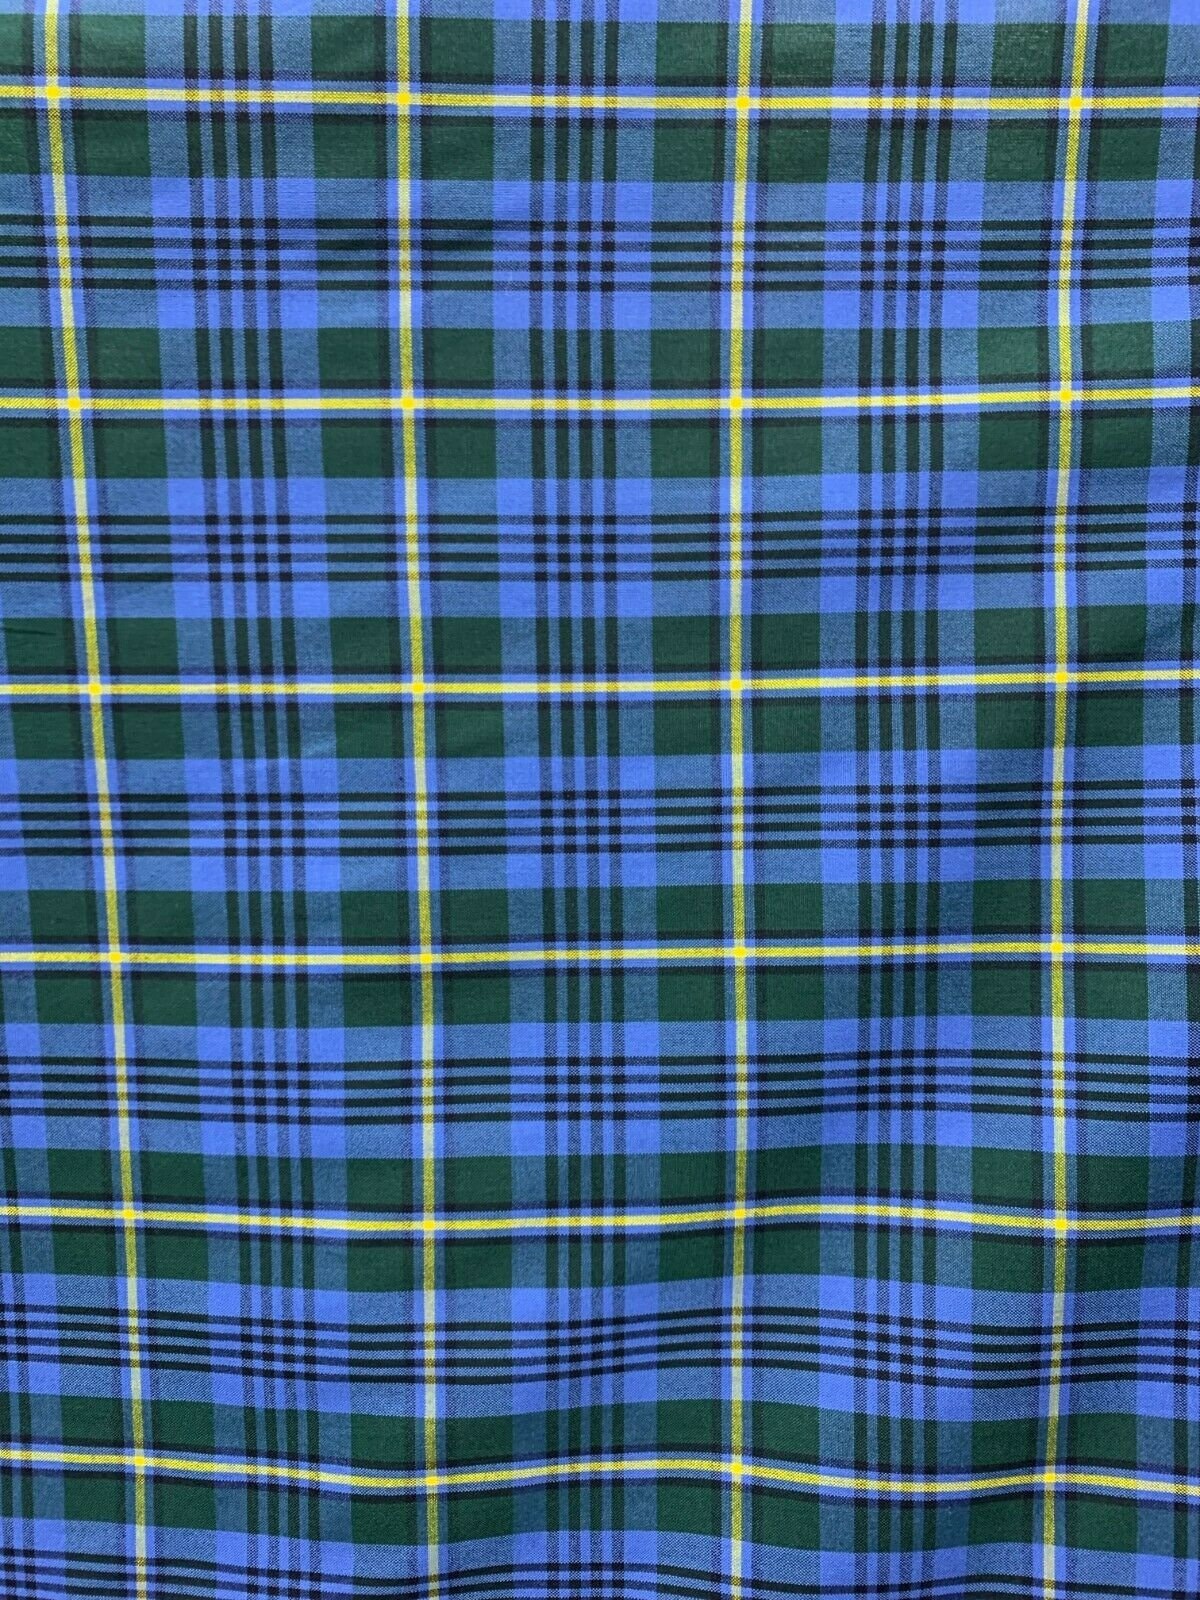 BLUE GREEN YELLOW Plaid Poly Cotton Uniform Poplin Fabric (60 in.) Sold By The Yard